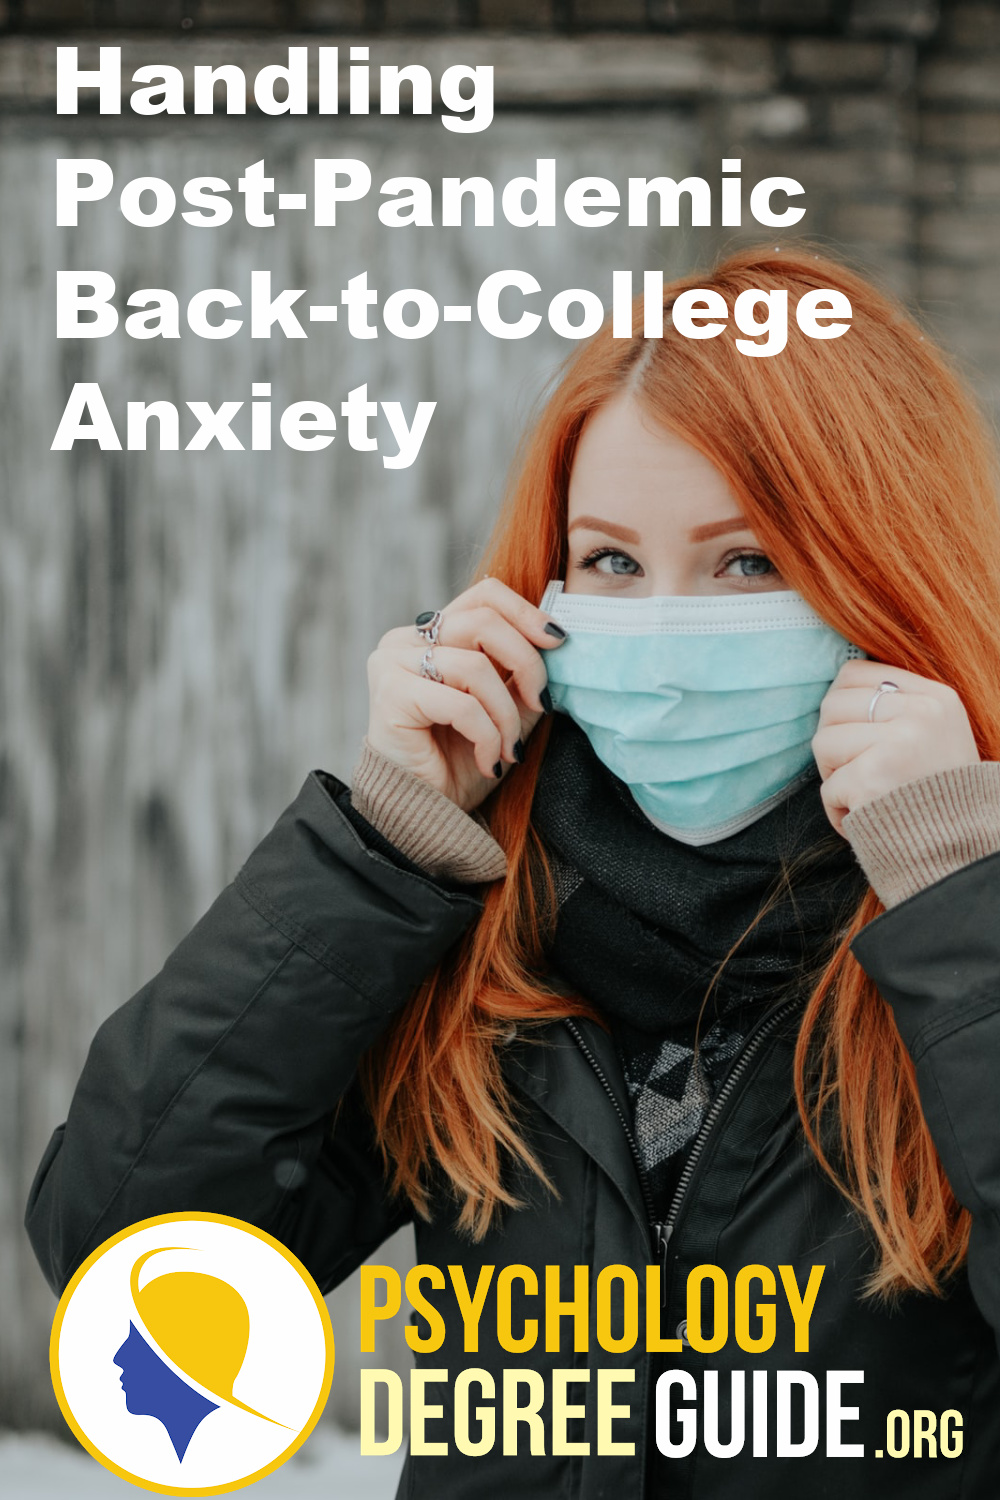 Handling Post-Pandemic Back-to-College Anxiety